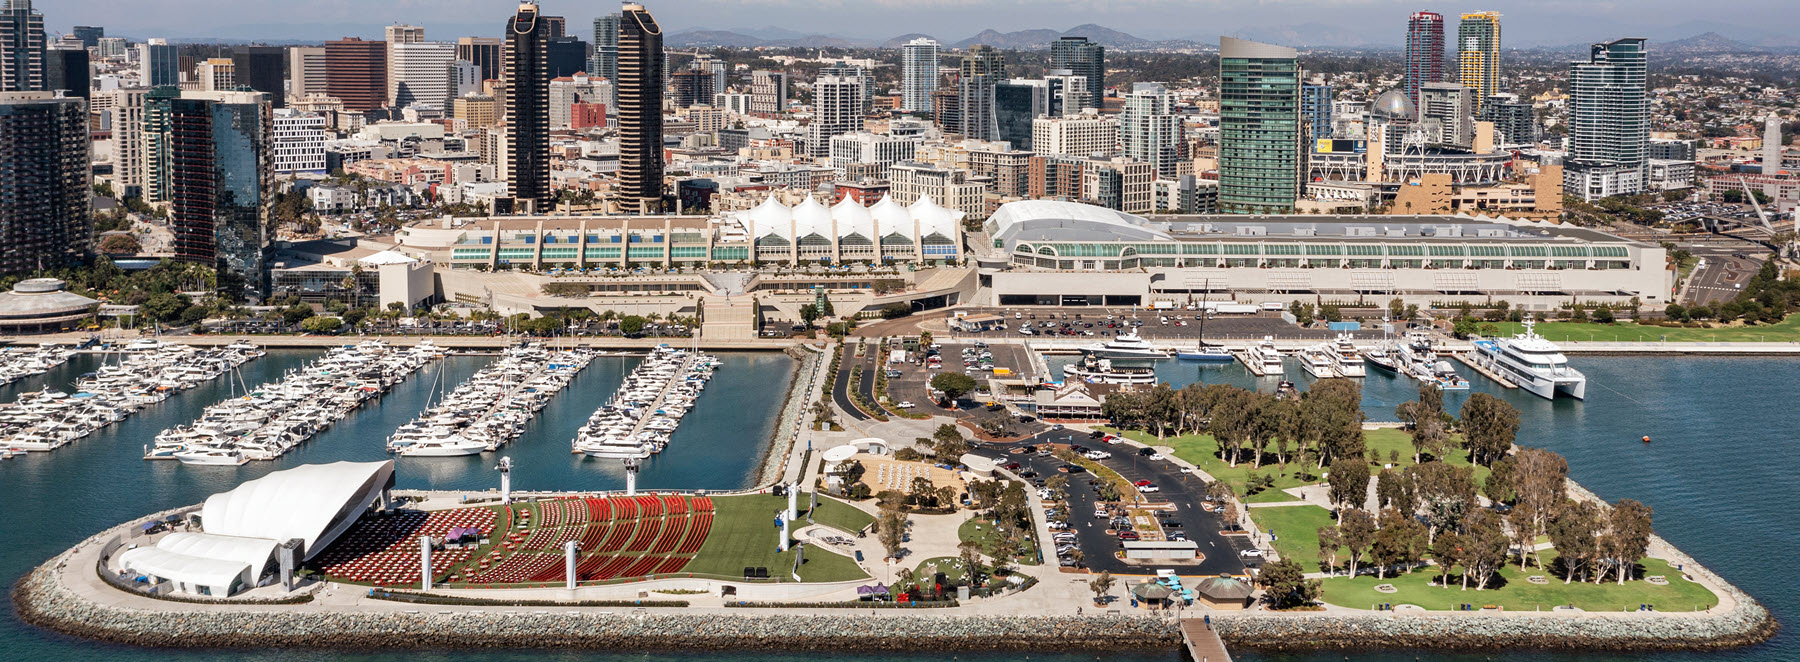 The San Diego Convention Center and surrounding waterfront